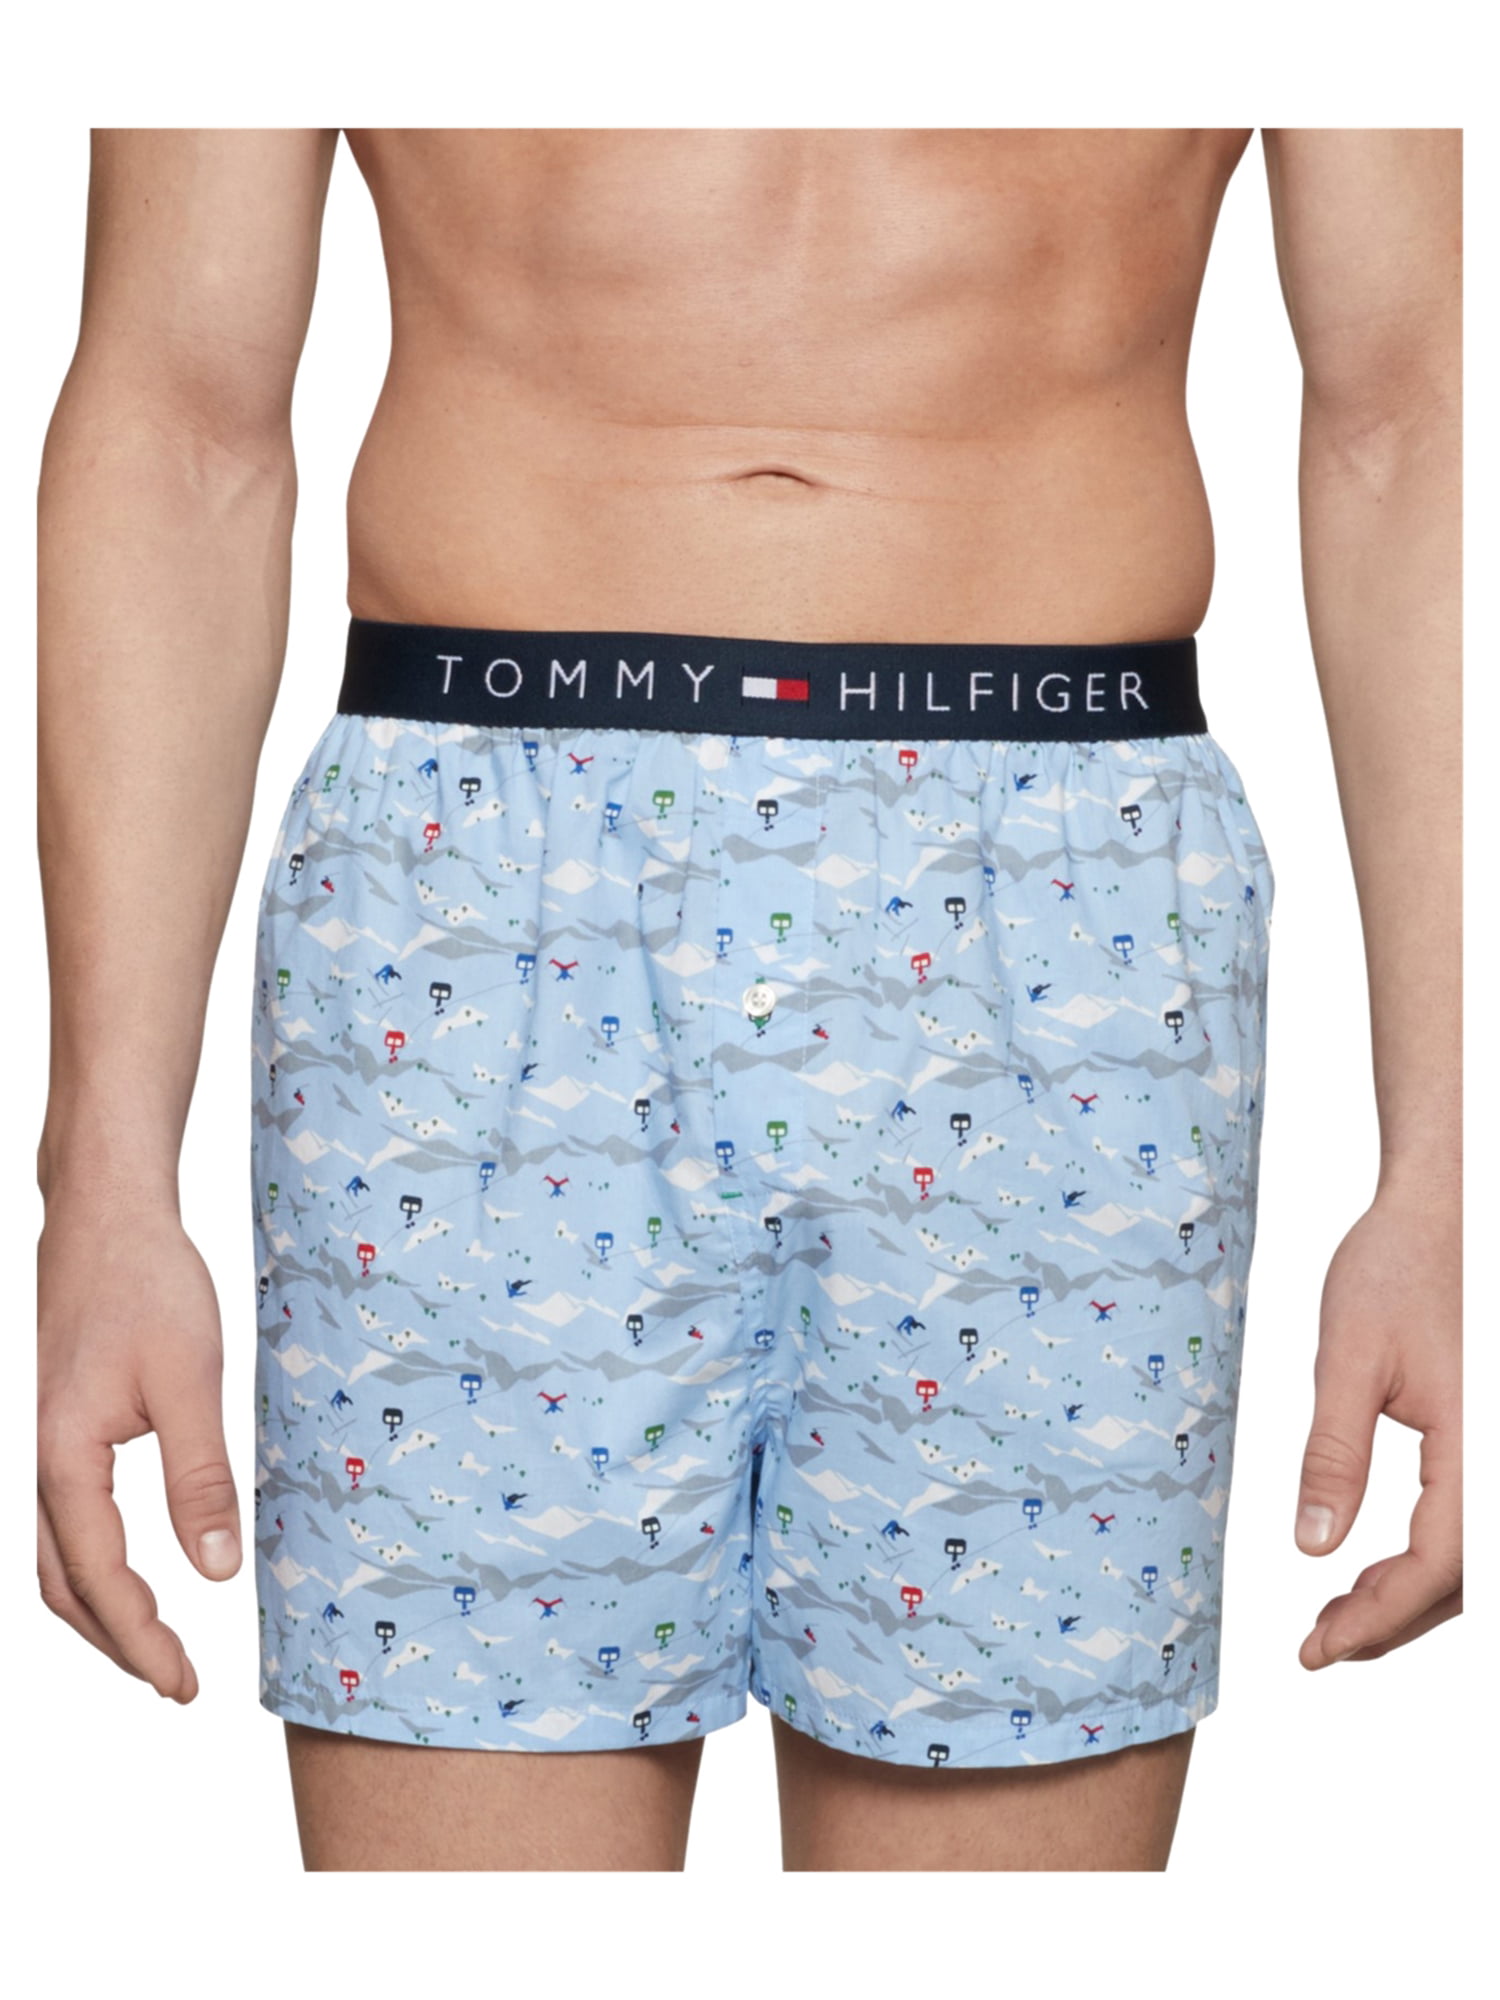 Tommy Hilfiger Tommy Hilfiger Mens Printed Woven Underwear Boxers